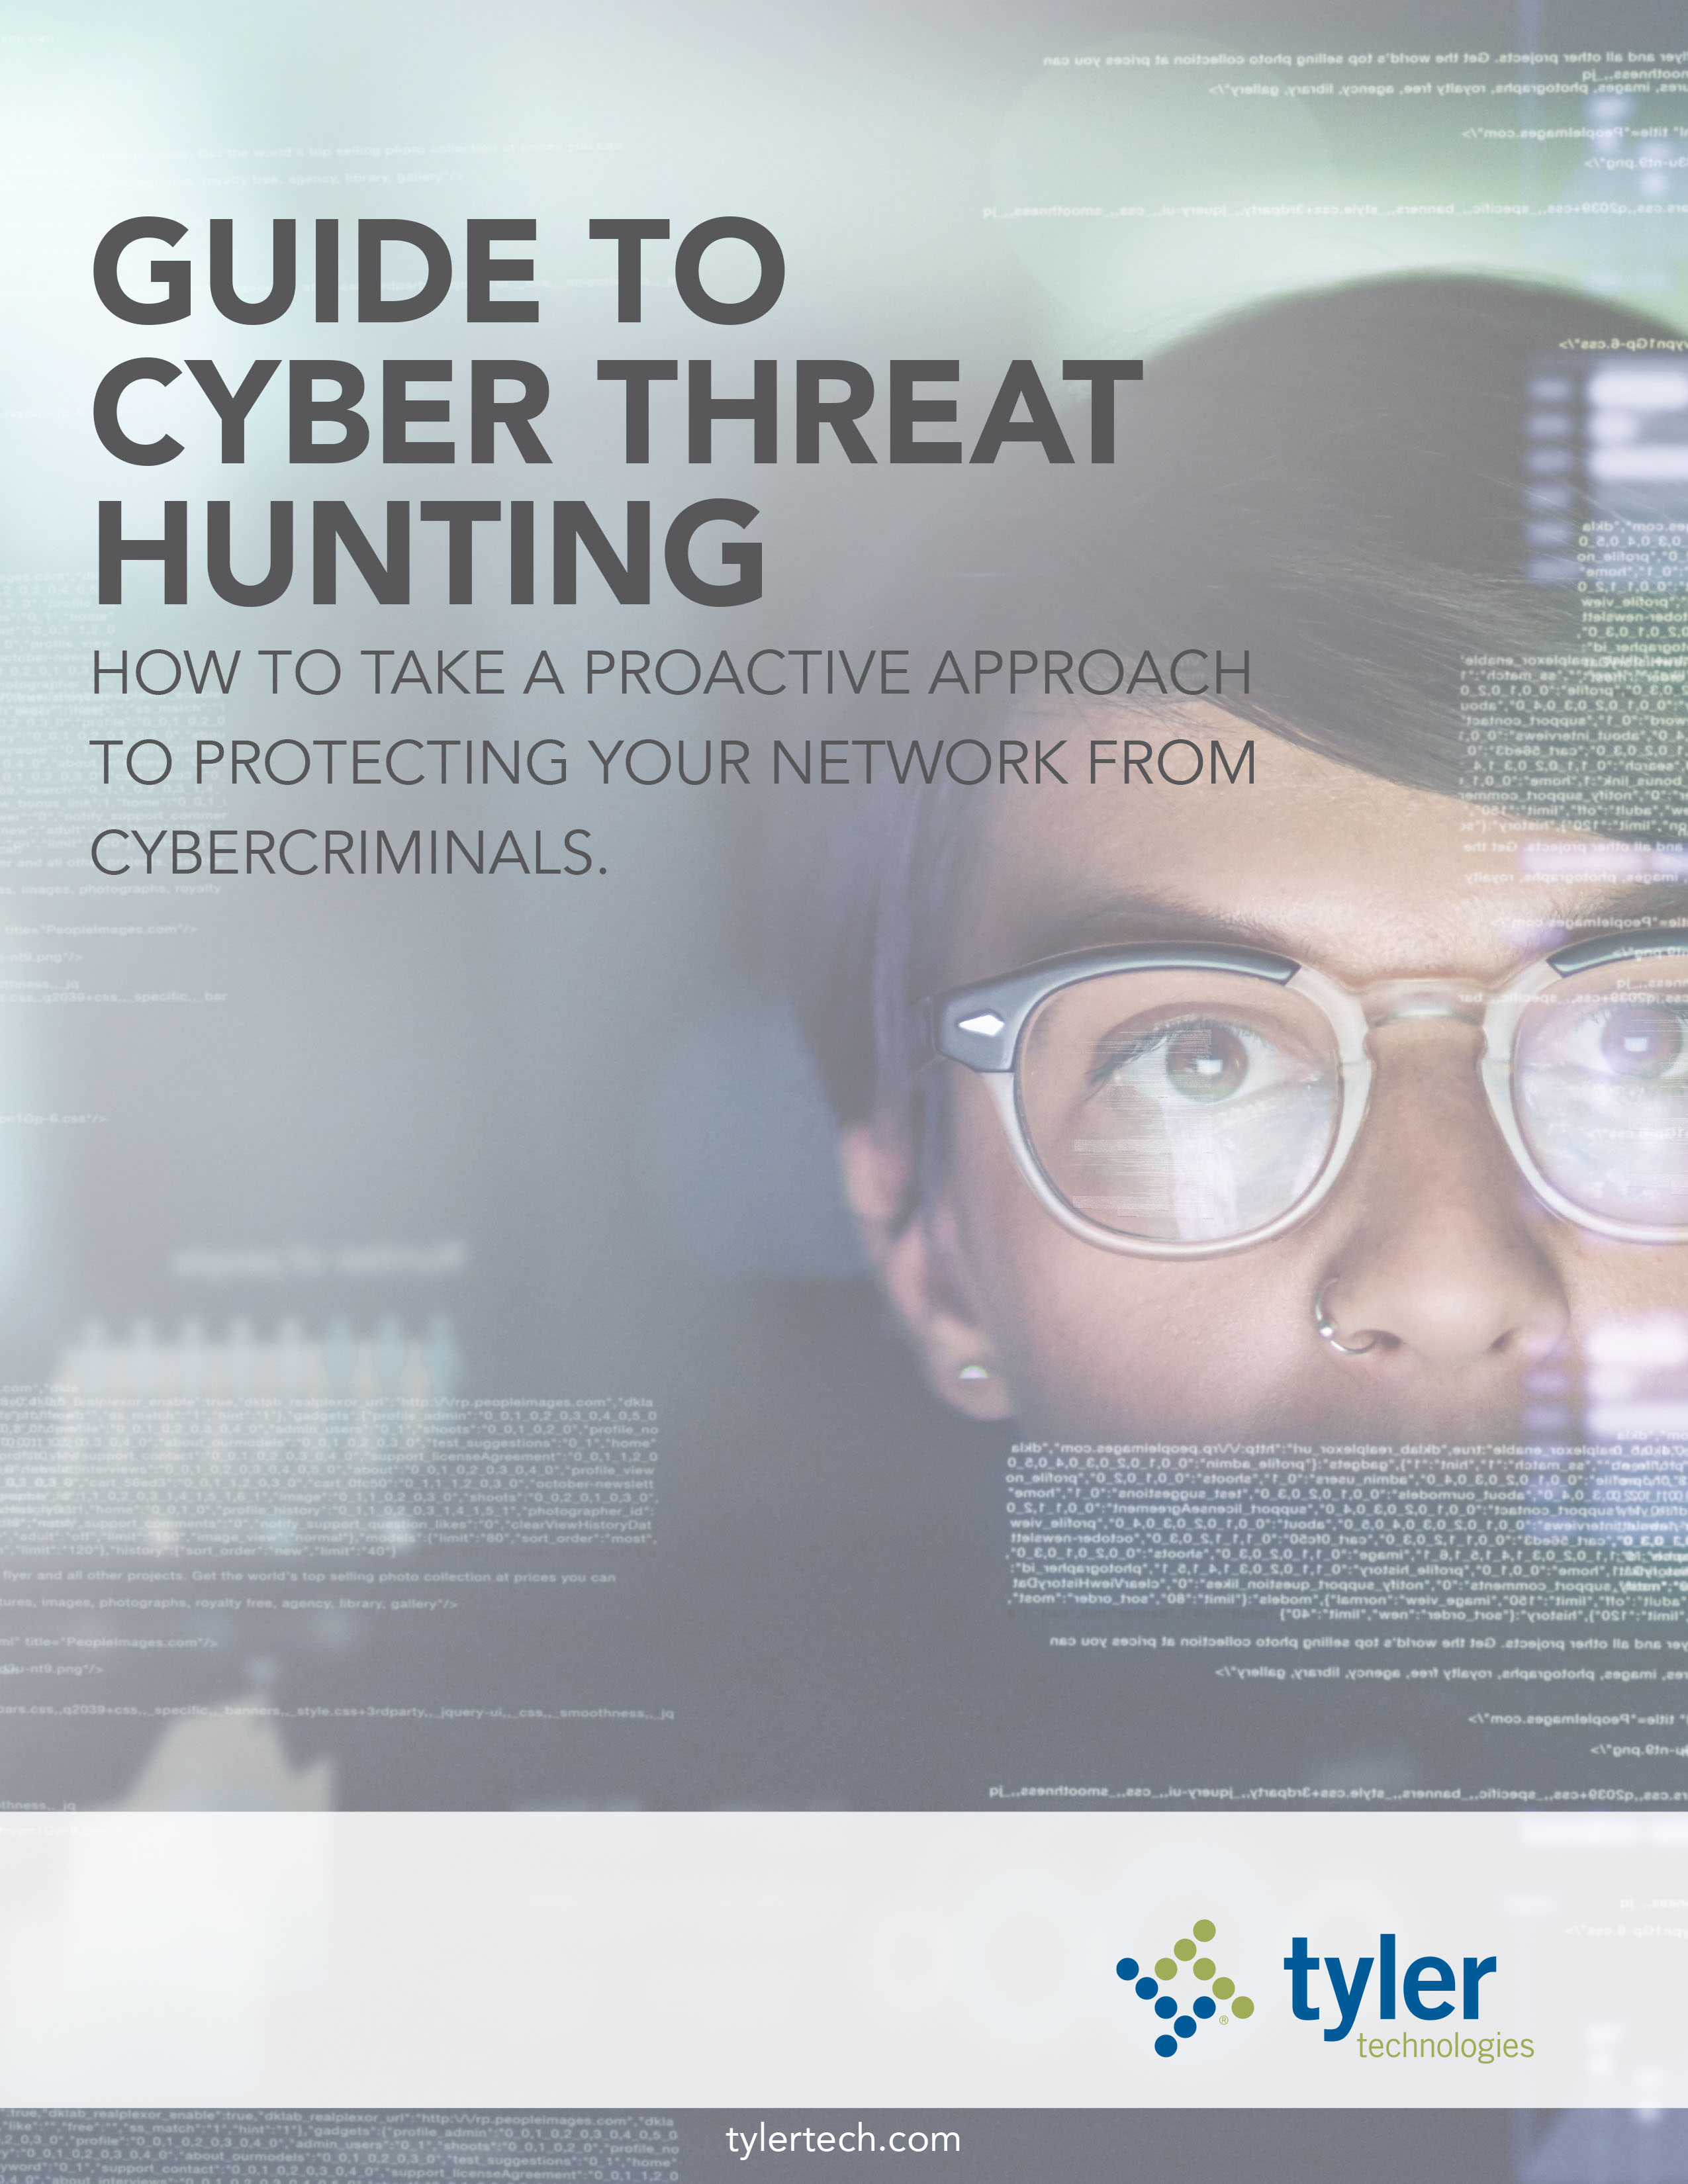 Guide to Cyber Threat Hunting